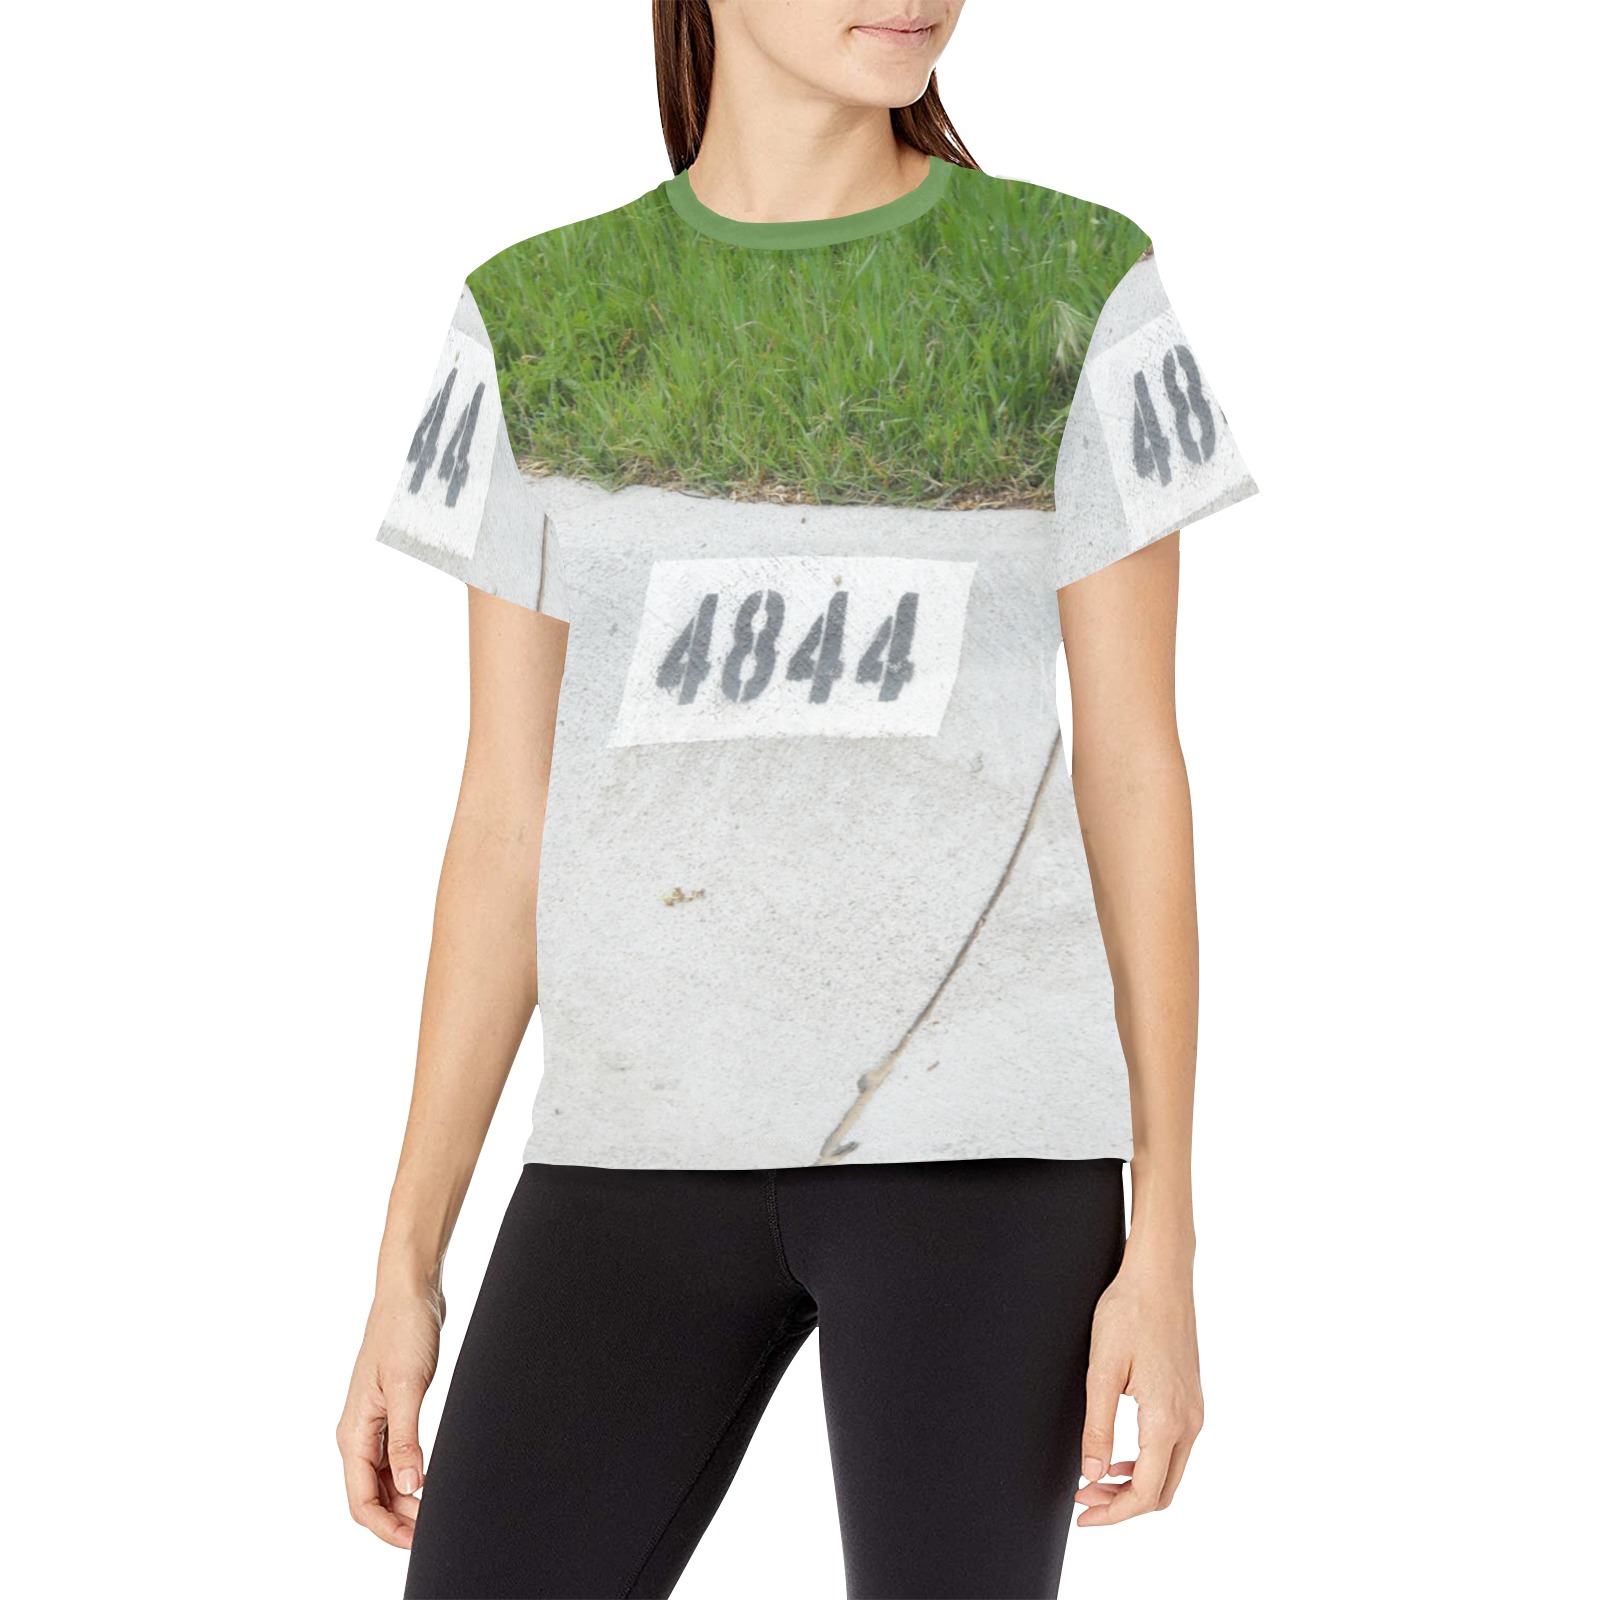 Street Number 4844 with green collar Women's All Over Print Crew Neck T-Shirt (Model T40-2)